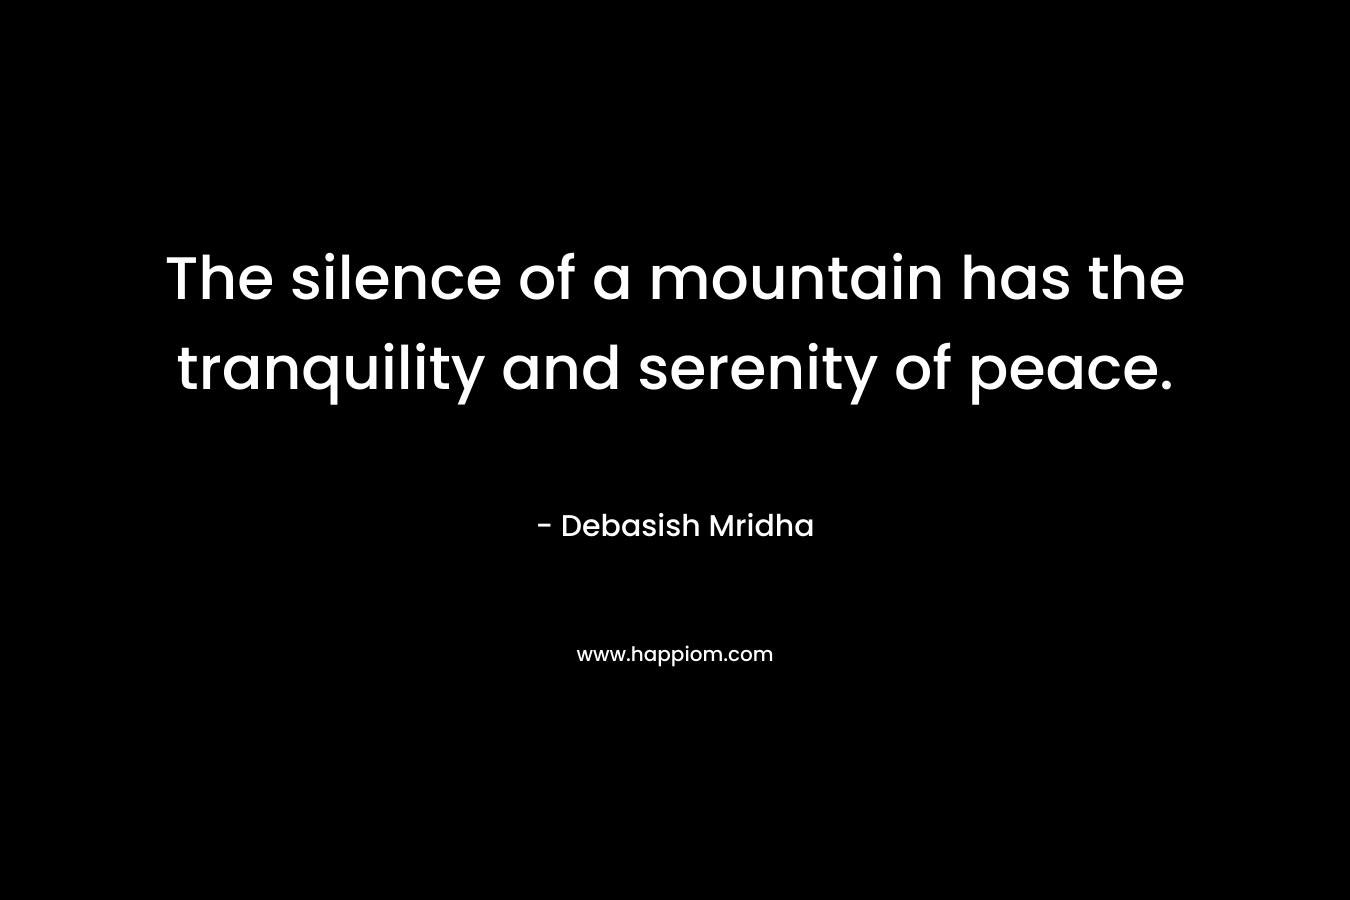 The silence of a mountain has the tranquility and serenity of peace.